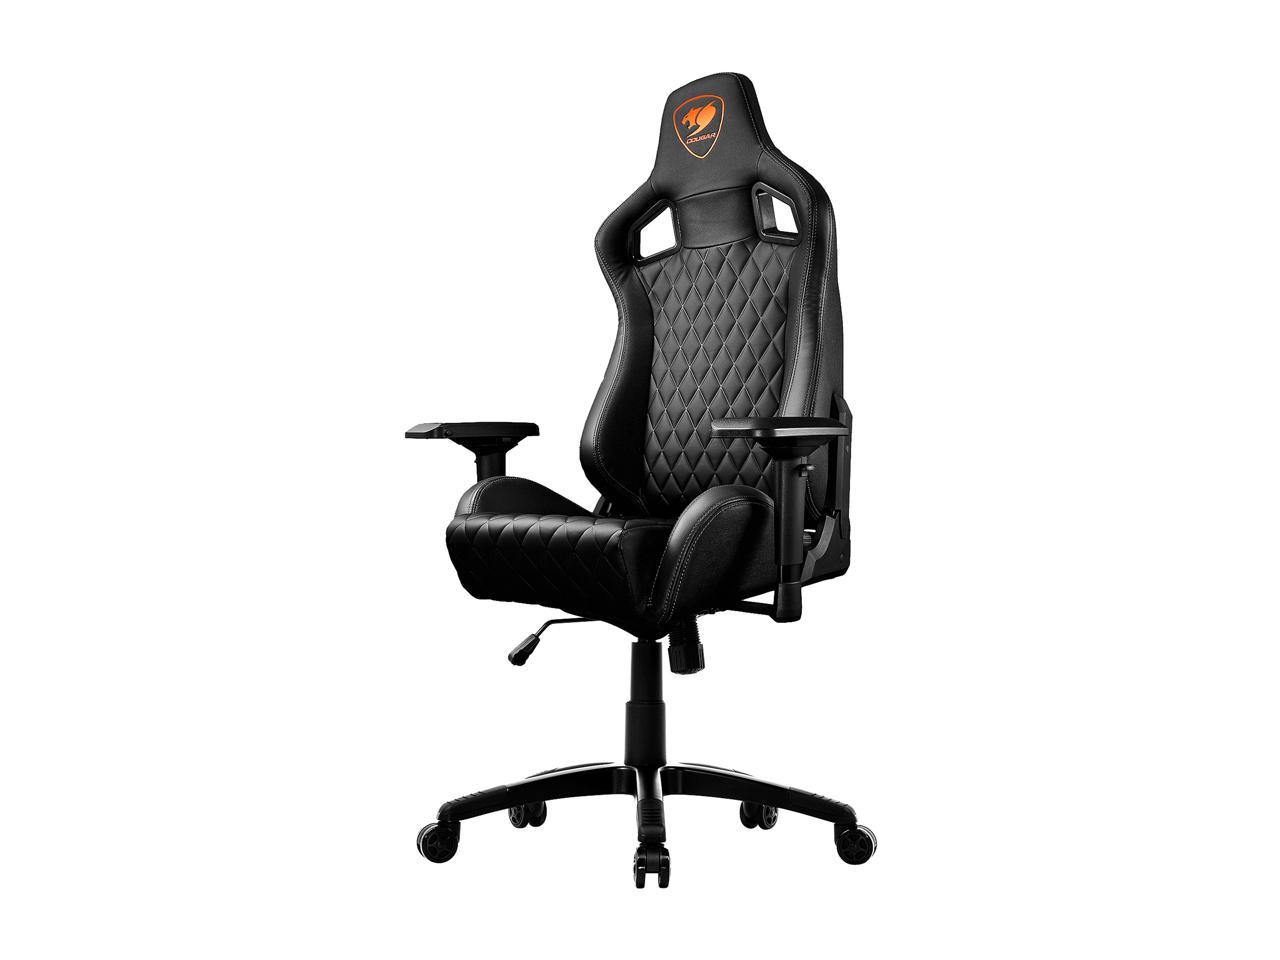 Cougar Armor S (Black) Luxury Gaming Chair With Breathable Premium Pvc Leather And Body-Embracing High Back Design